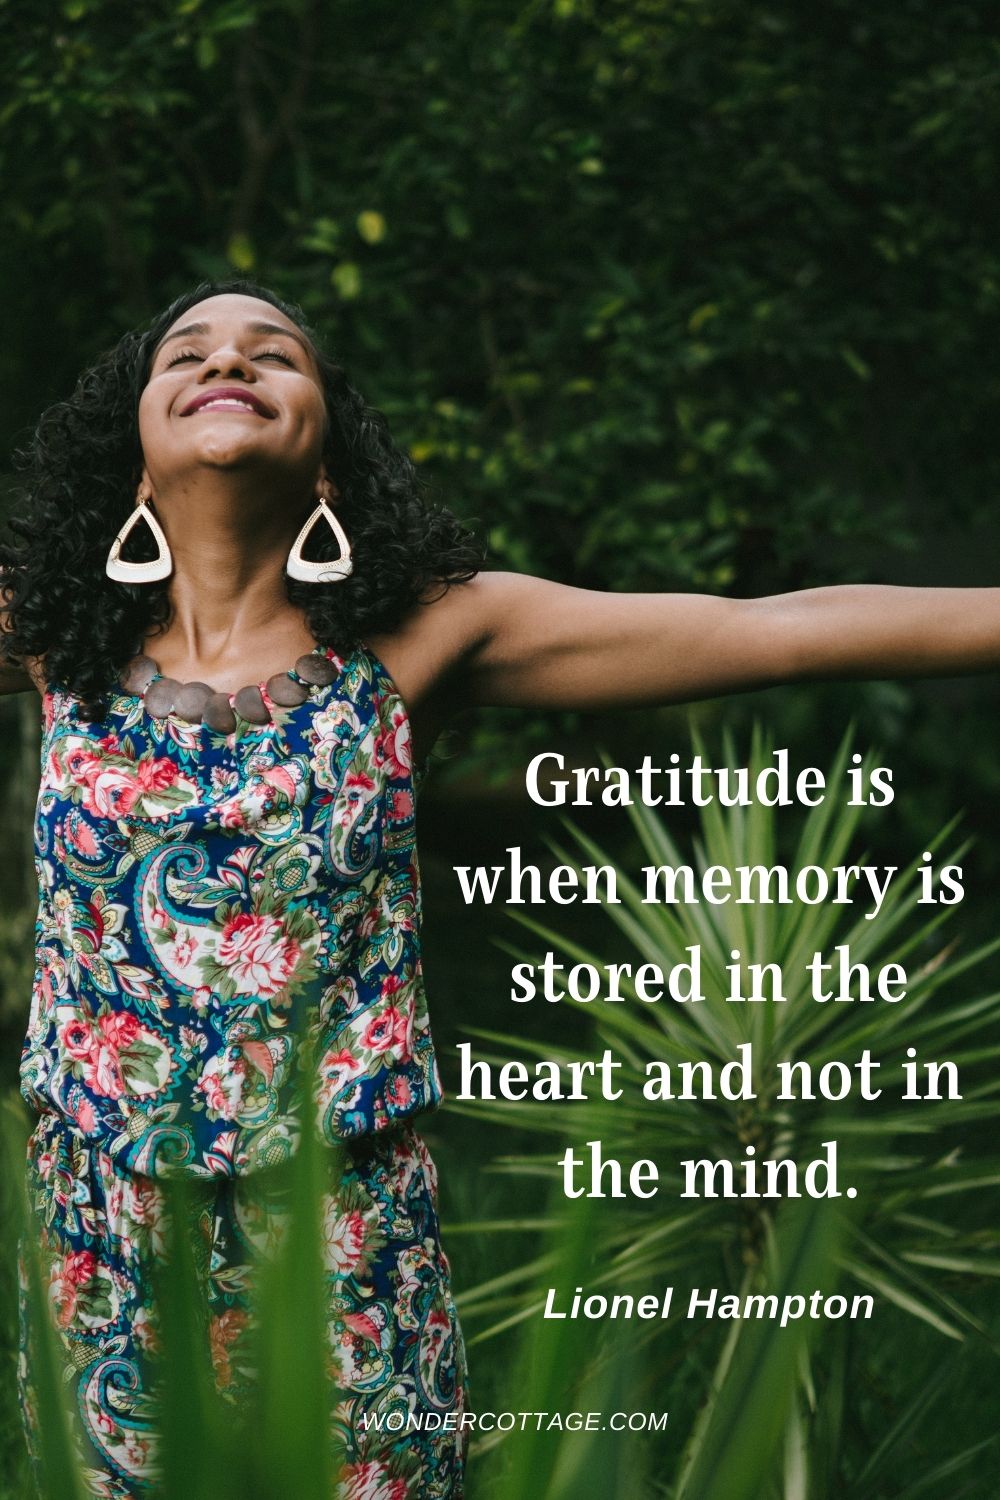 Gratitude is when memory is stored in the heart and not in the mind. Lionel Hampton